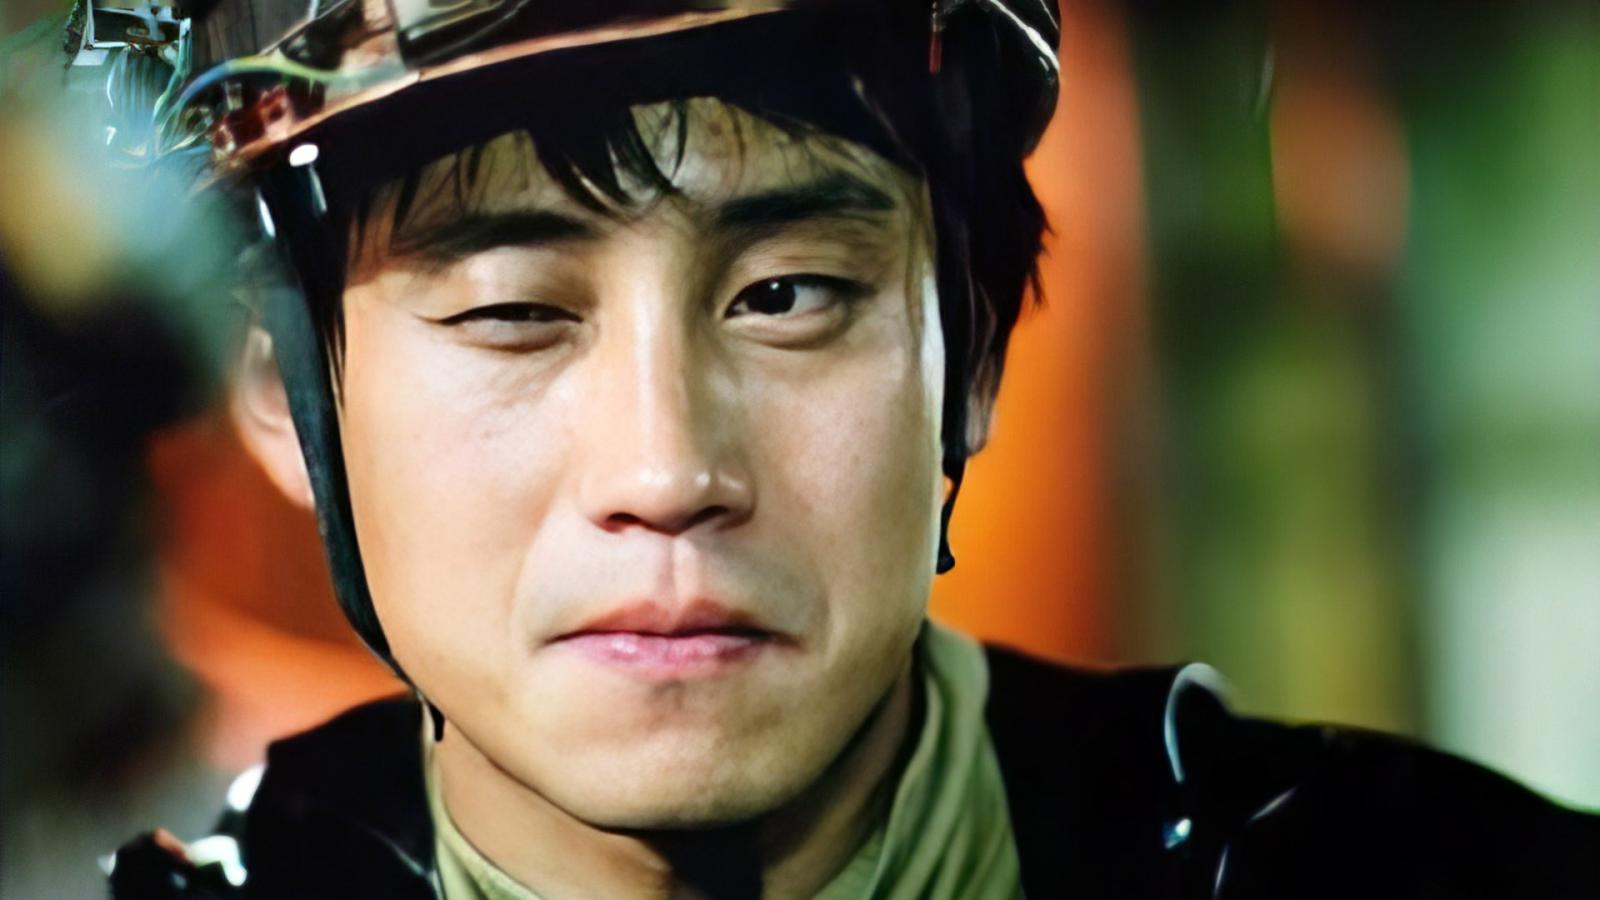 15 South Korean Movies You Probably Never Heard Of, But Should - image 13